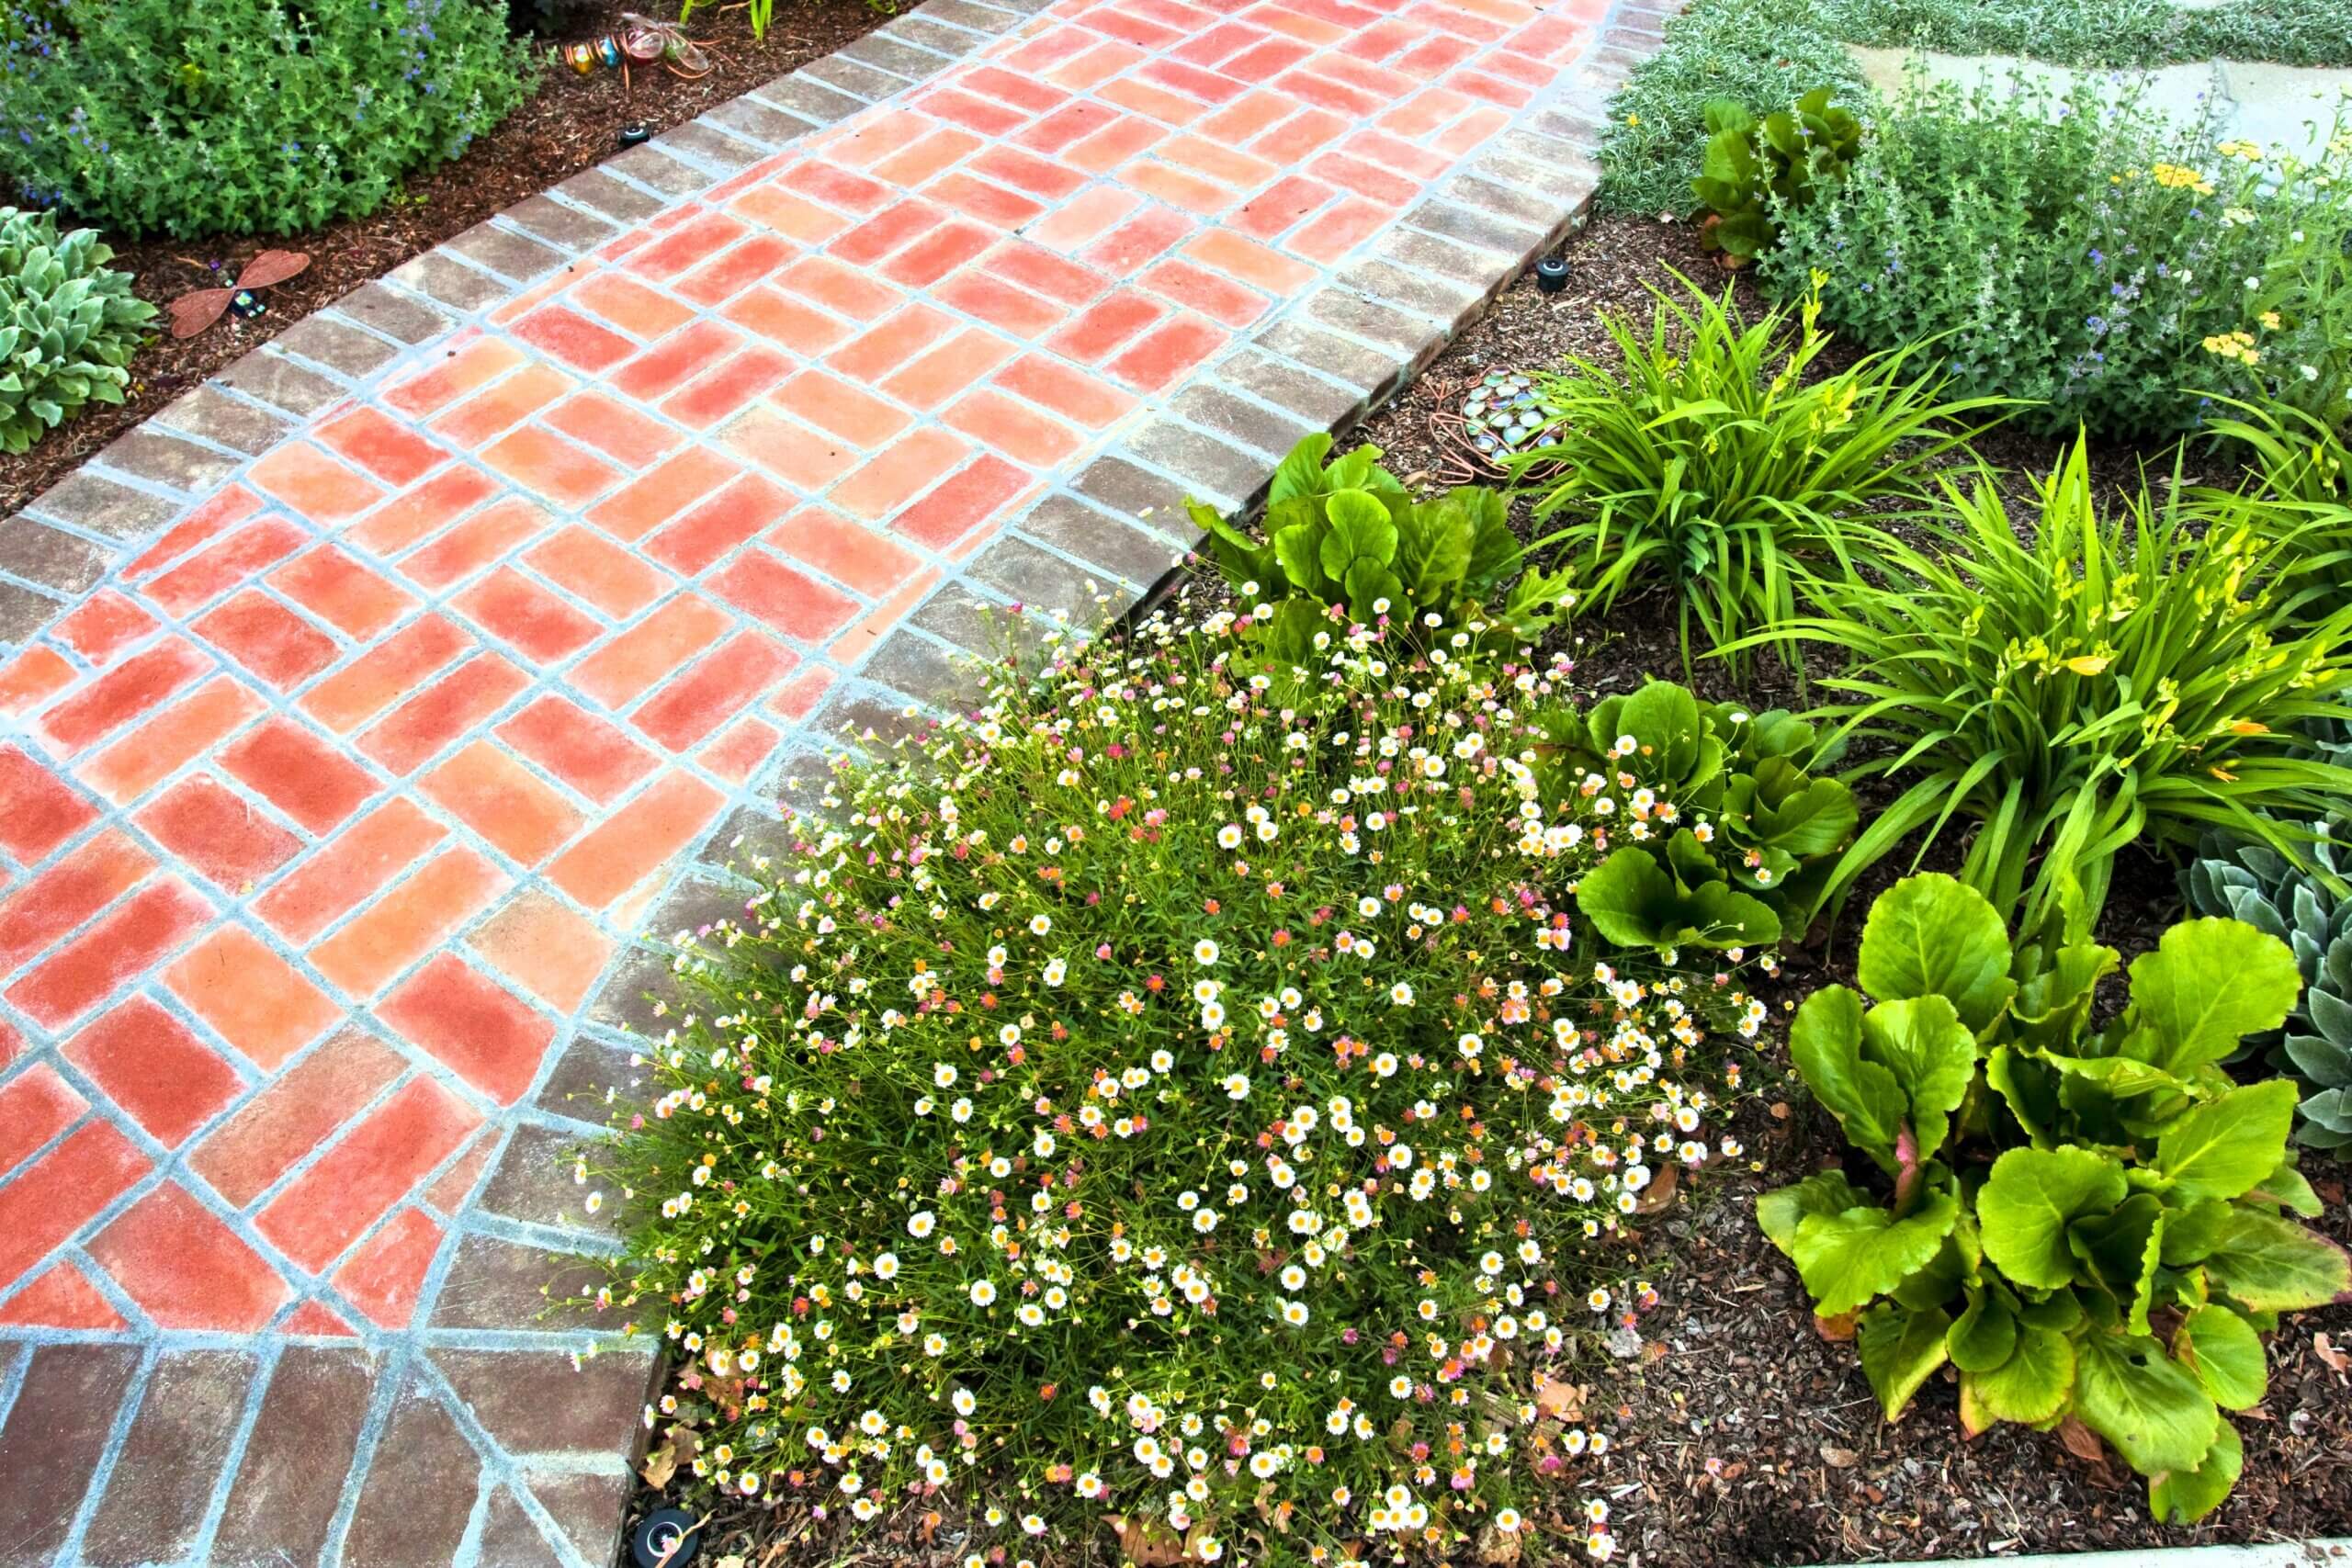 Short front yard entry walkway made from red brick and surrounded by low ground cover plantings and flowers